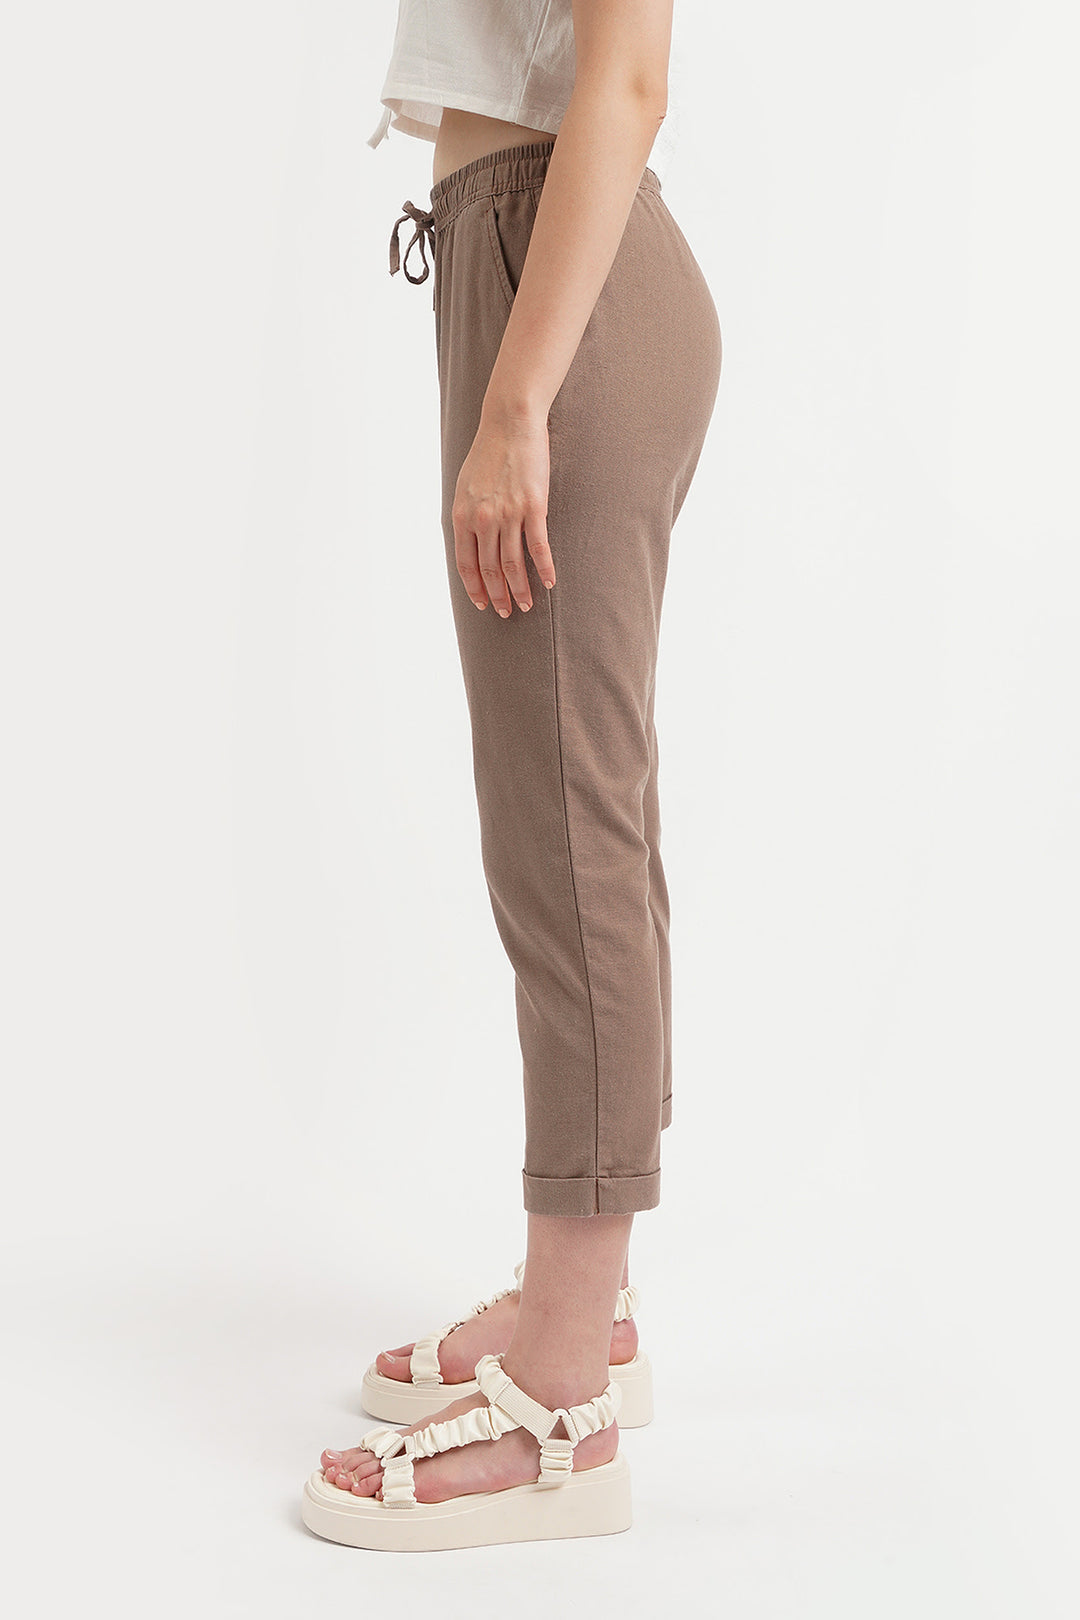 Chic Fit Linen Pull On Trousers